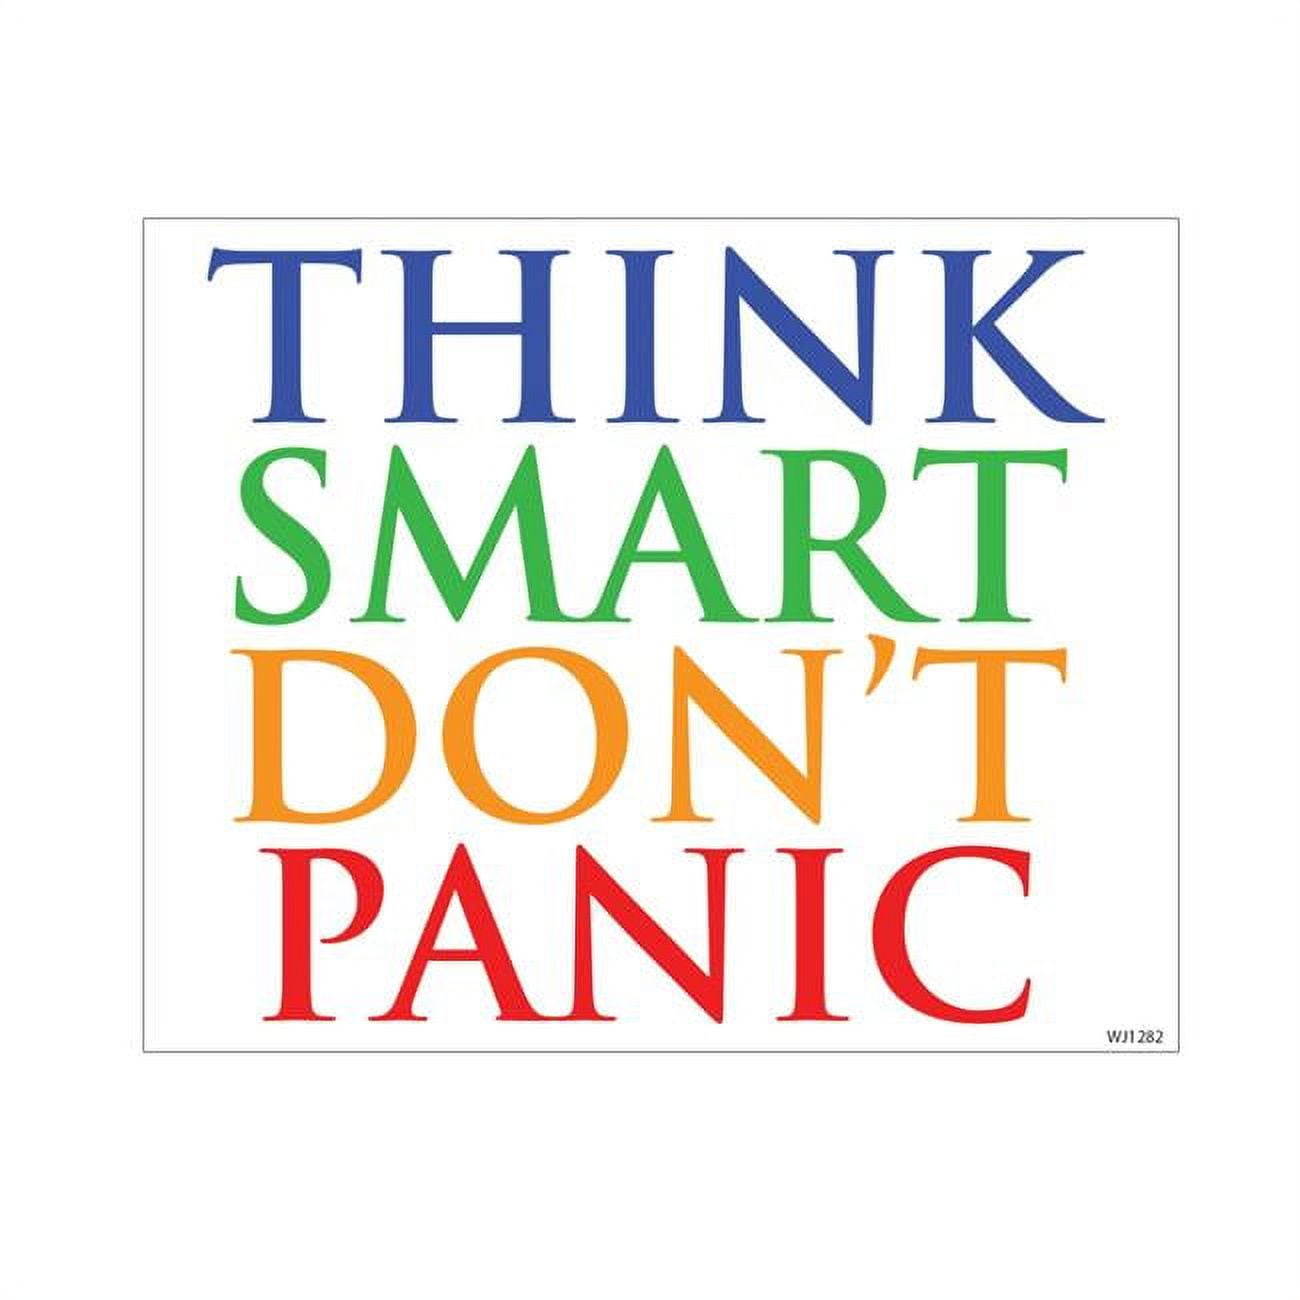 Picture of Advanced Graphics WJ1282 8 x 12 in. Think Smart Dont Panic Walljammer